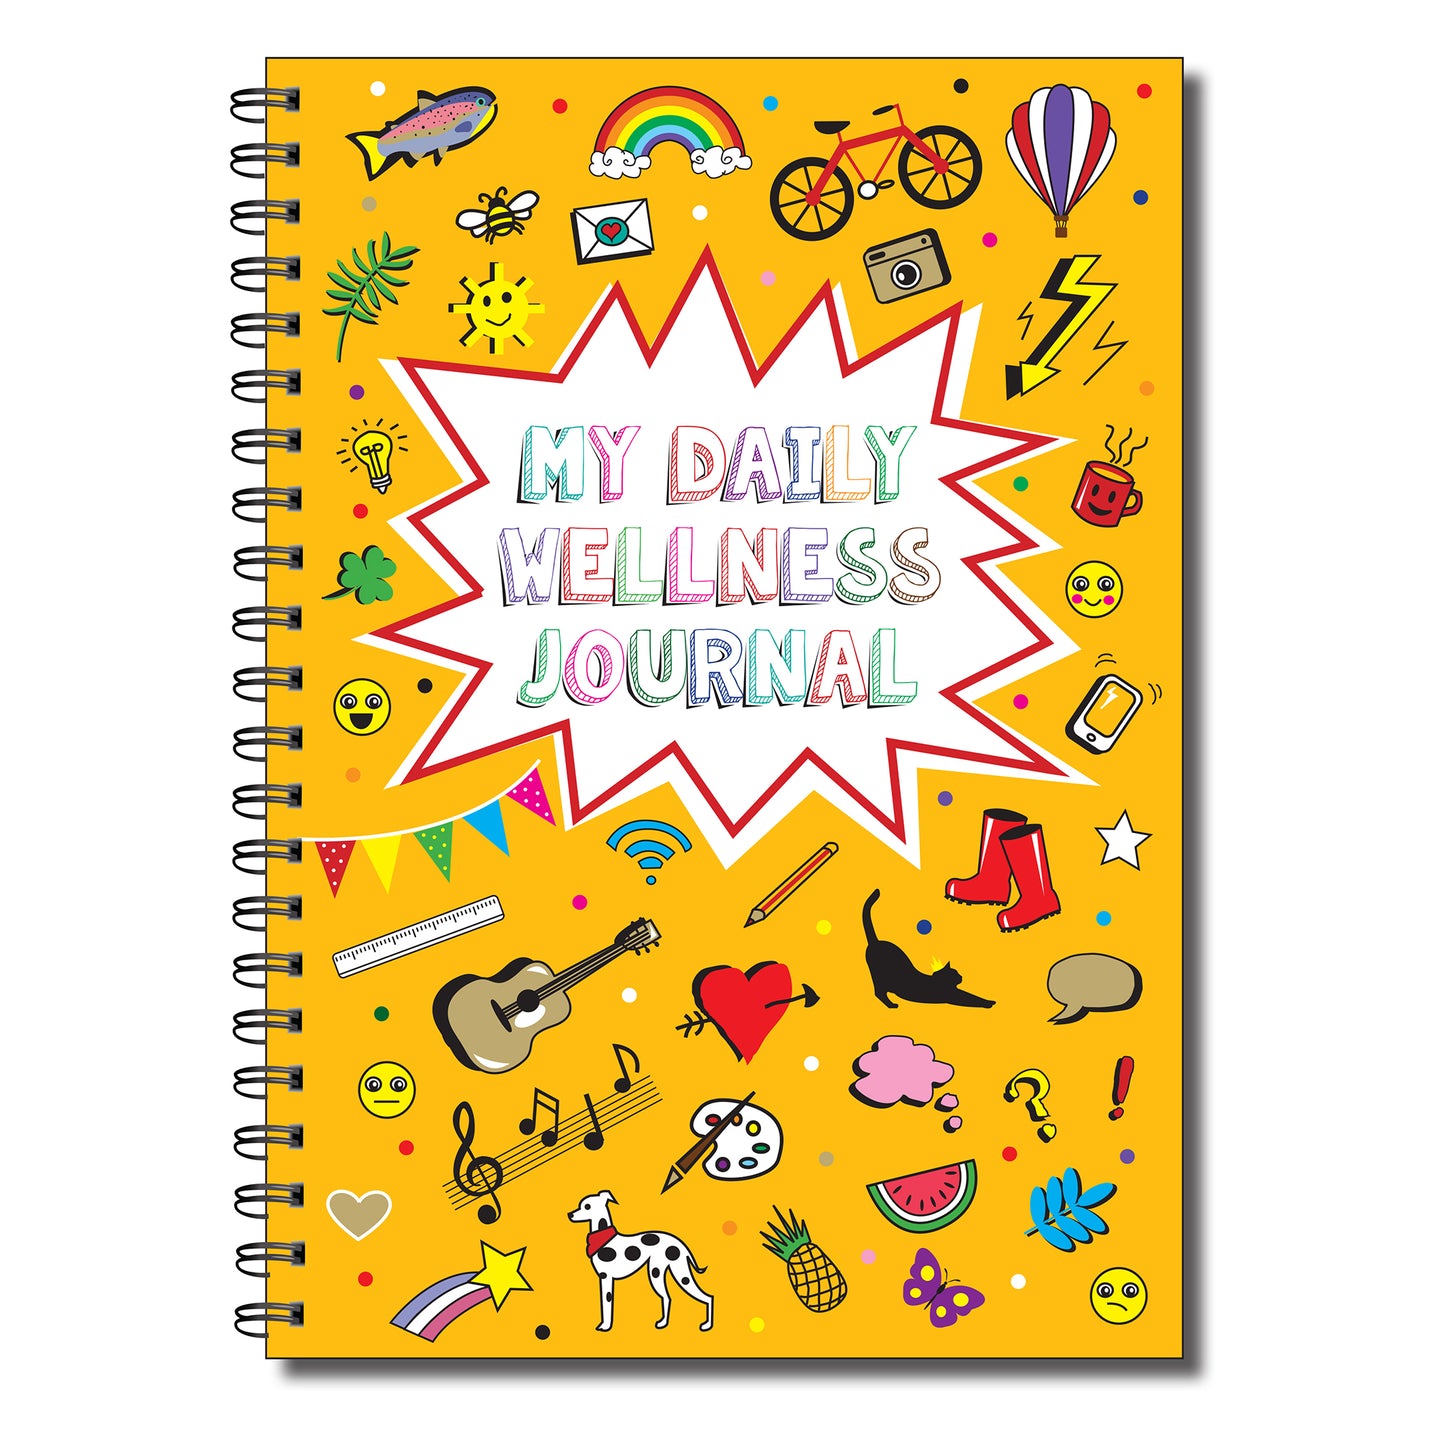 My Daily Wellness Journal | Teens | Adults | Kids | A5 wiro book 50 pages printed to both sides on quality 120gsm